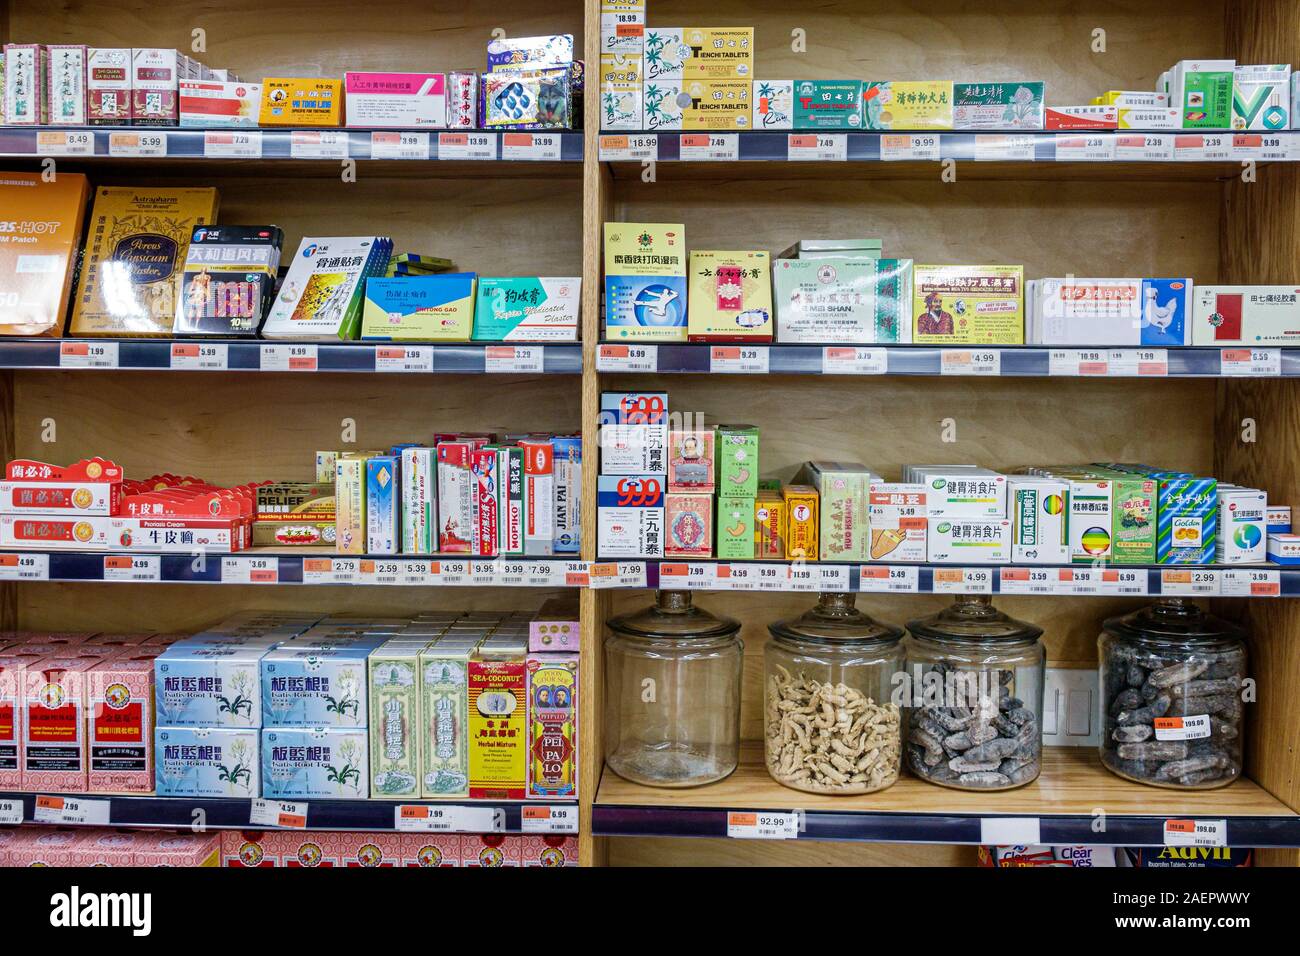 Orlando Florida,East Colonial Drive,Little Vietnam,Asian,health,traditional natural medicine,herbal,nutritional supplements,display sale,FL190920146 Stock Photo